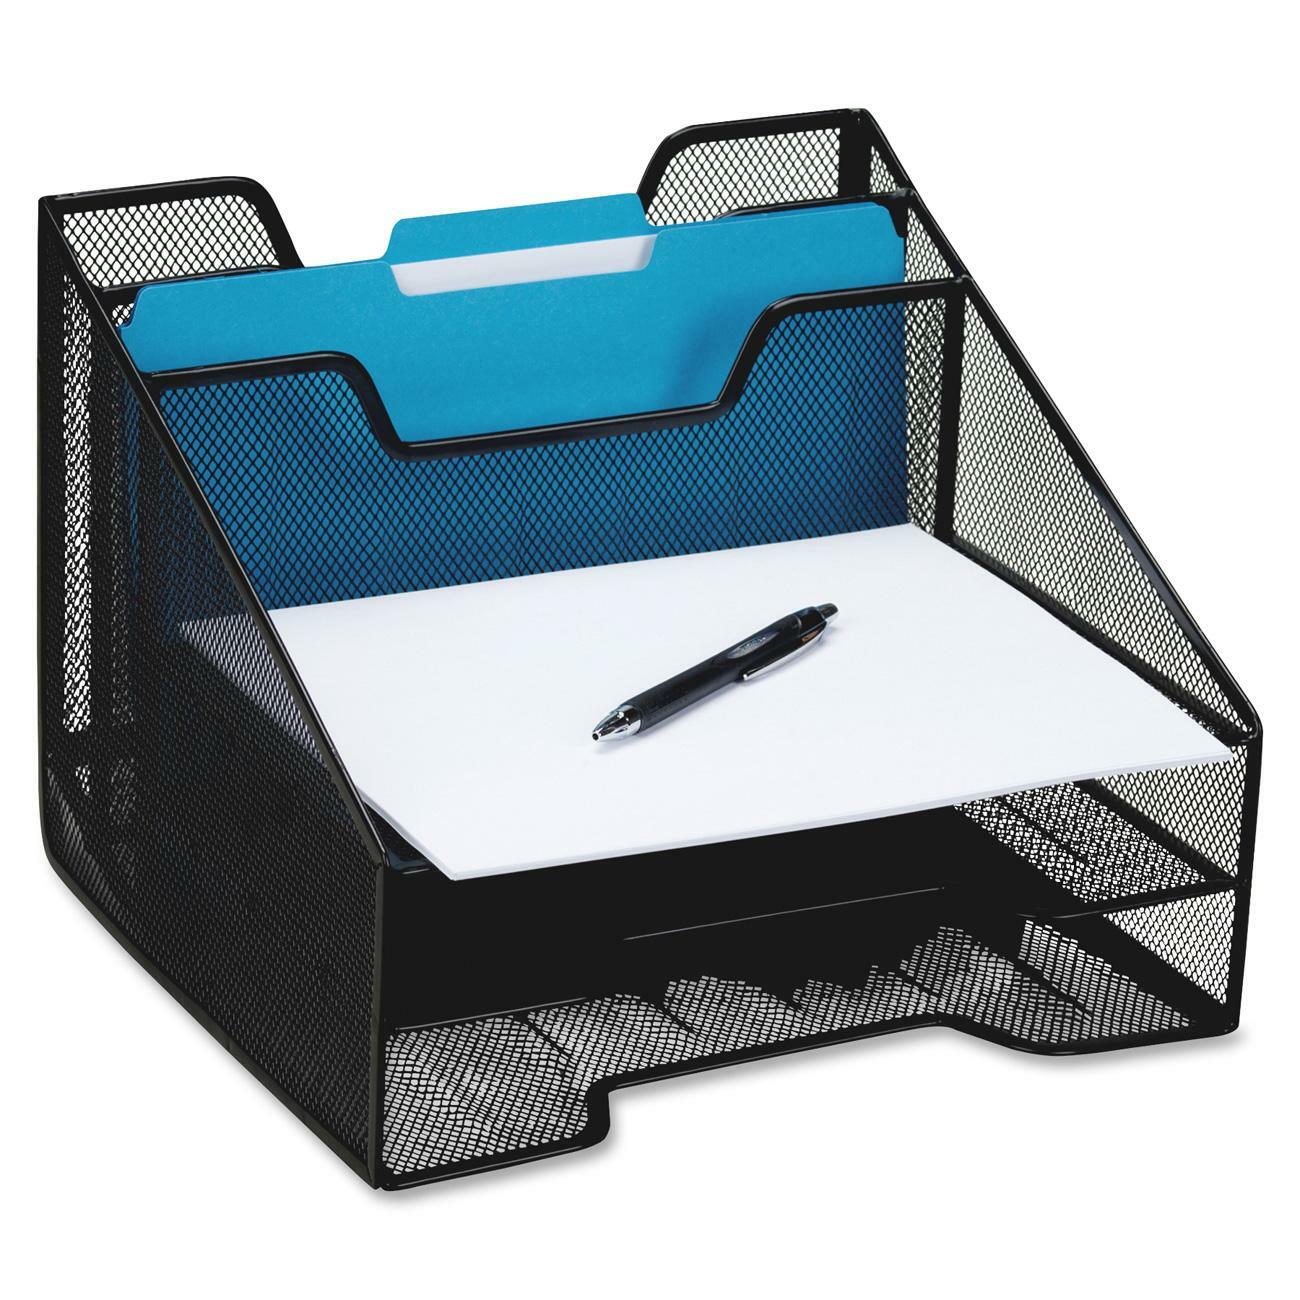 Ocean Stationery And Office Supplies Office Supplies Desk